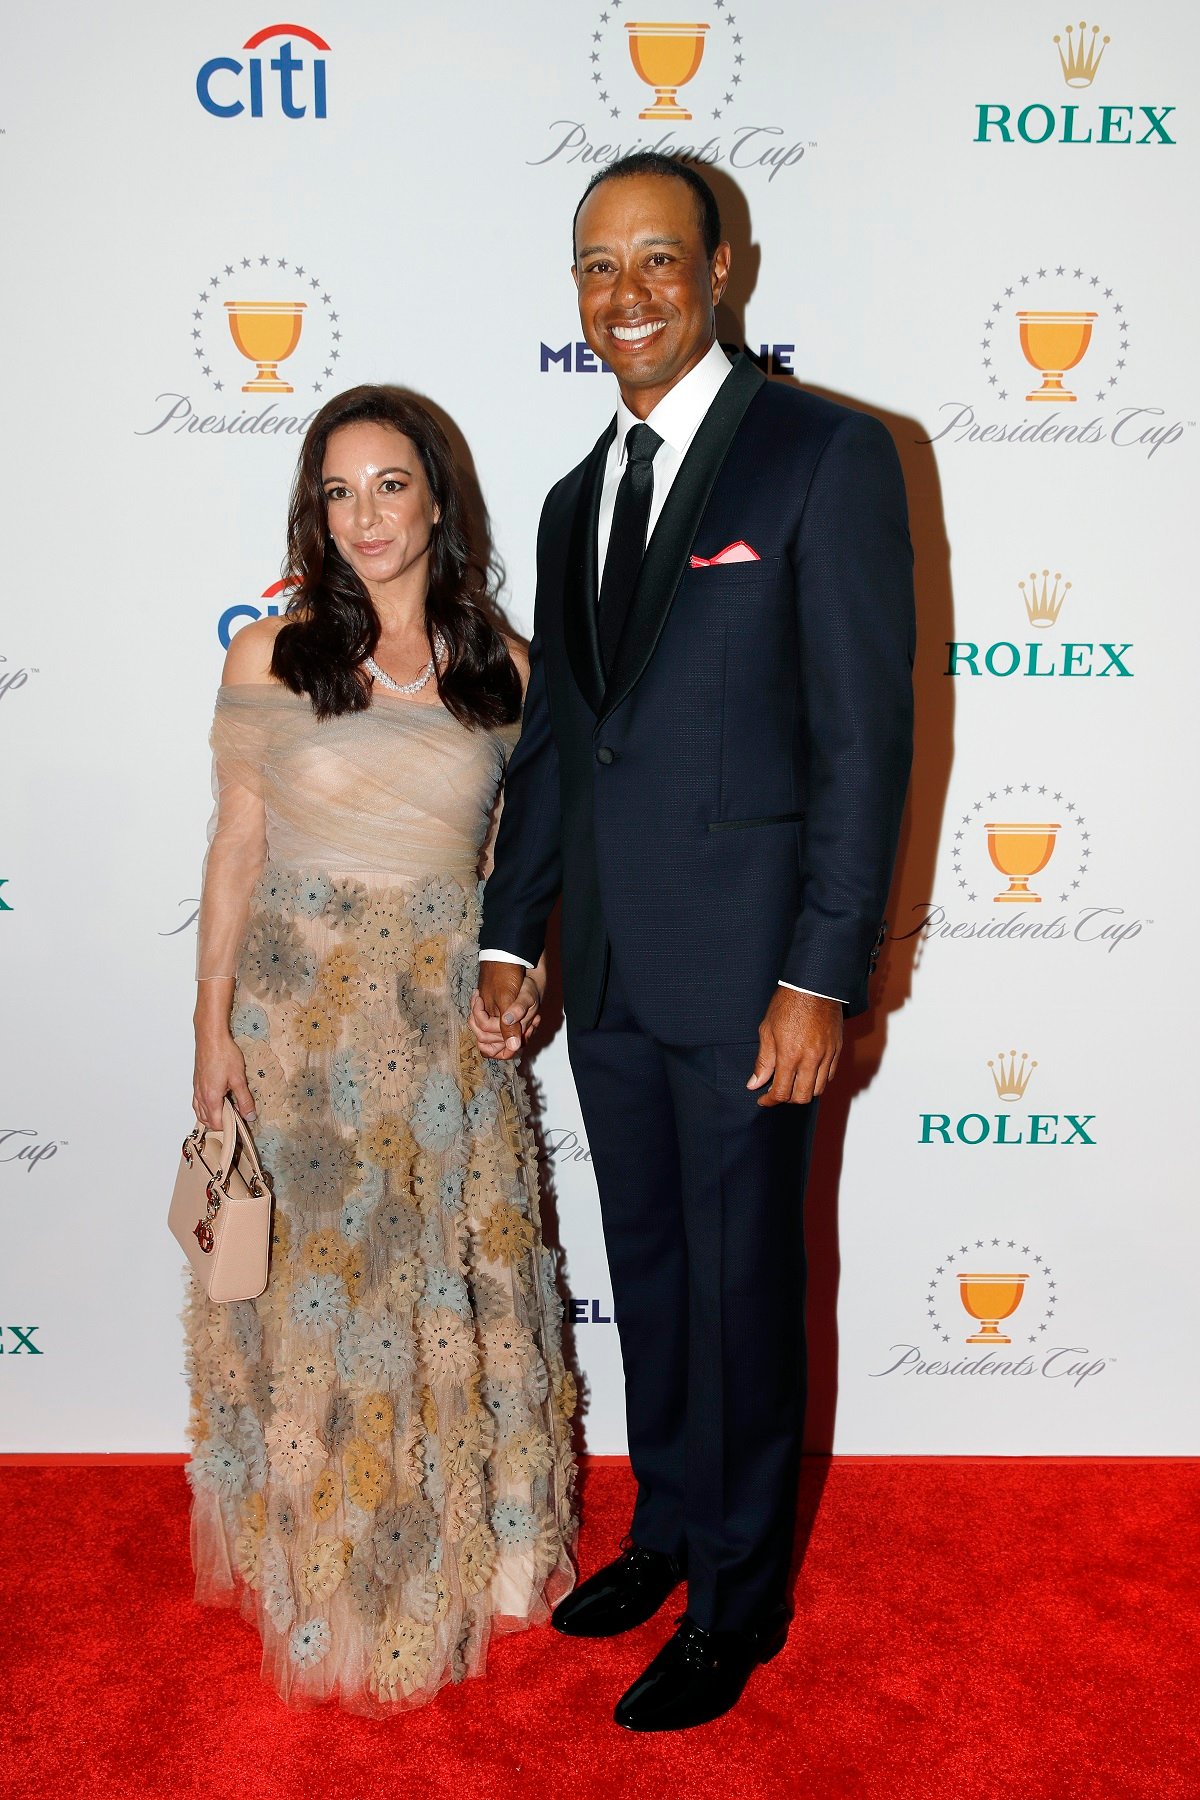 Tiger Woods and Erica Herman hold hands on the red carpet during the Presidents Cup Gala